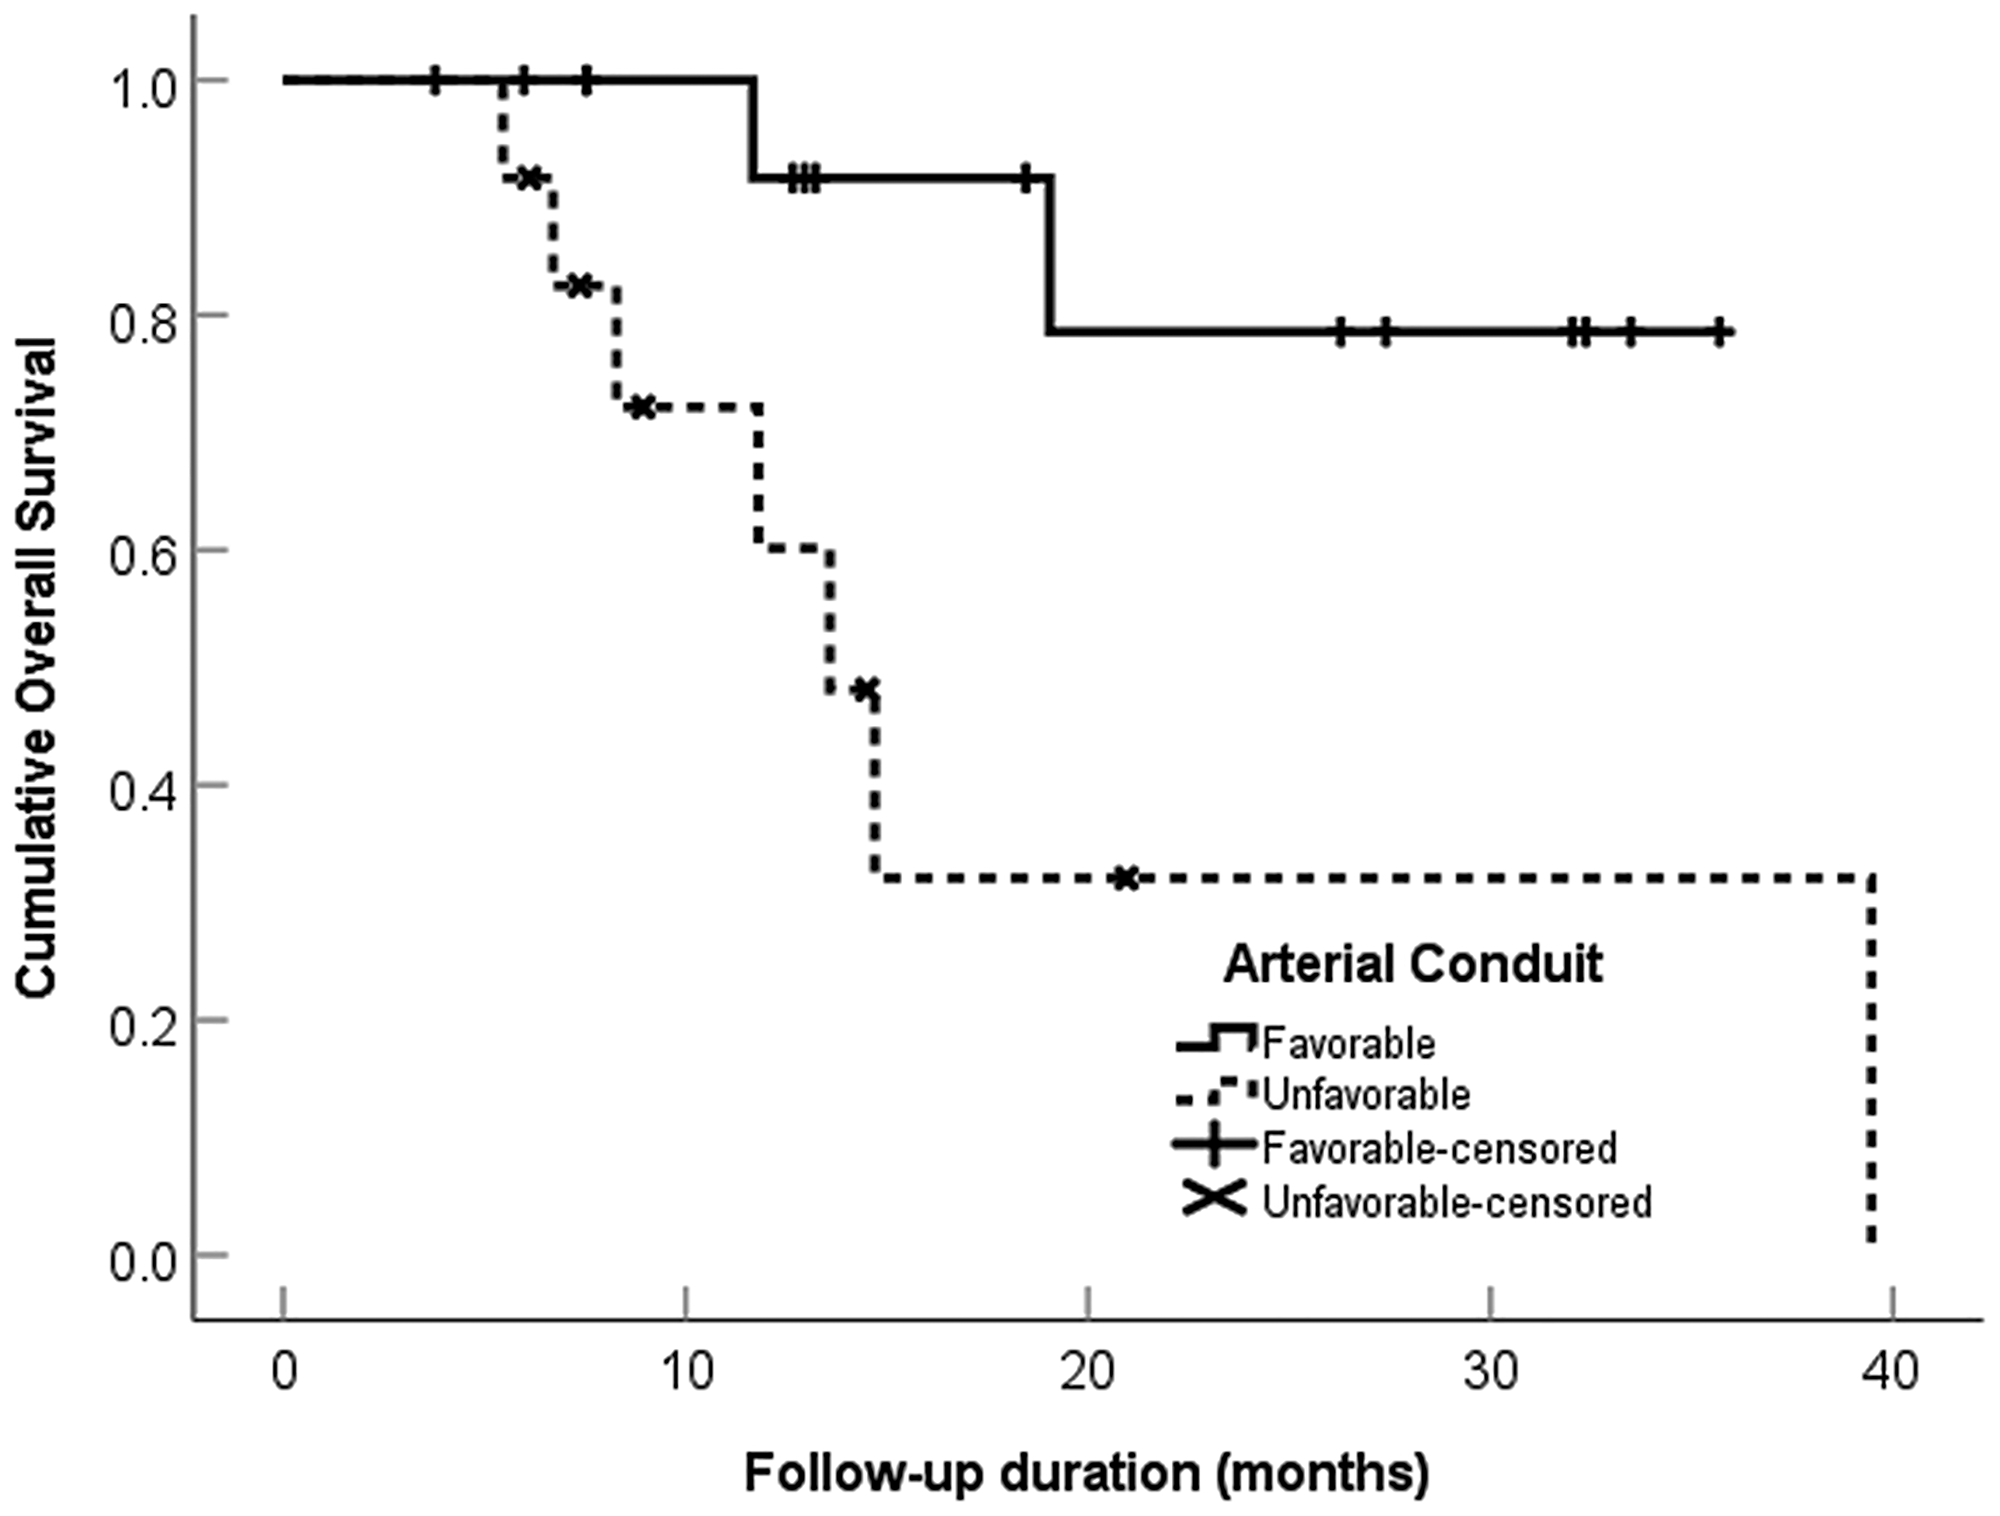 Overall survival categorized by arterial conduit favorability in 28 patients with intrahepatic cholangiocarcinoma treated with ablative radioembolization.